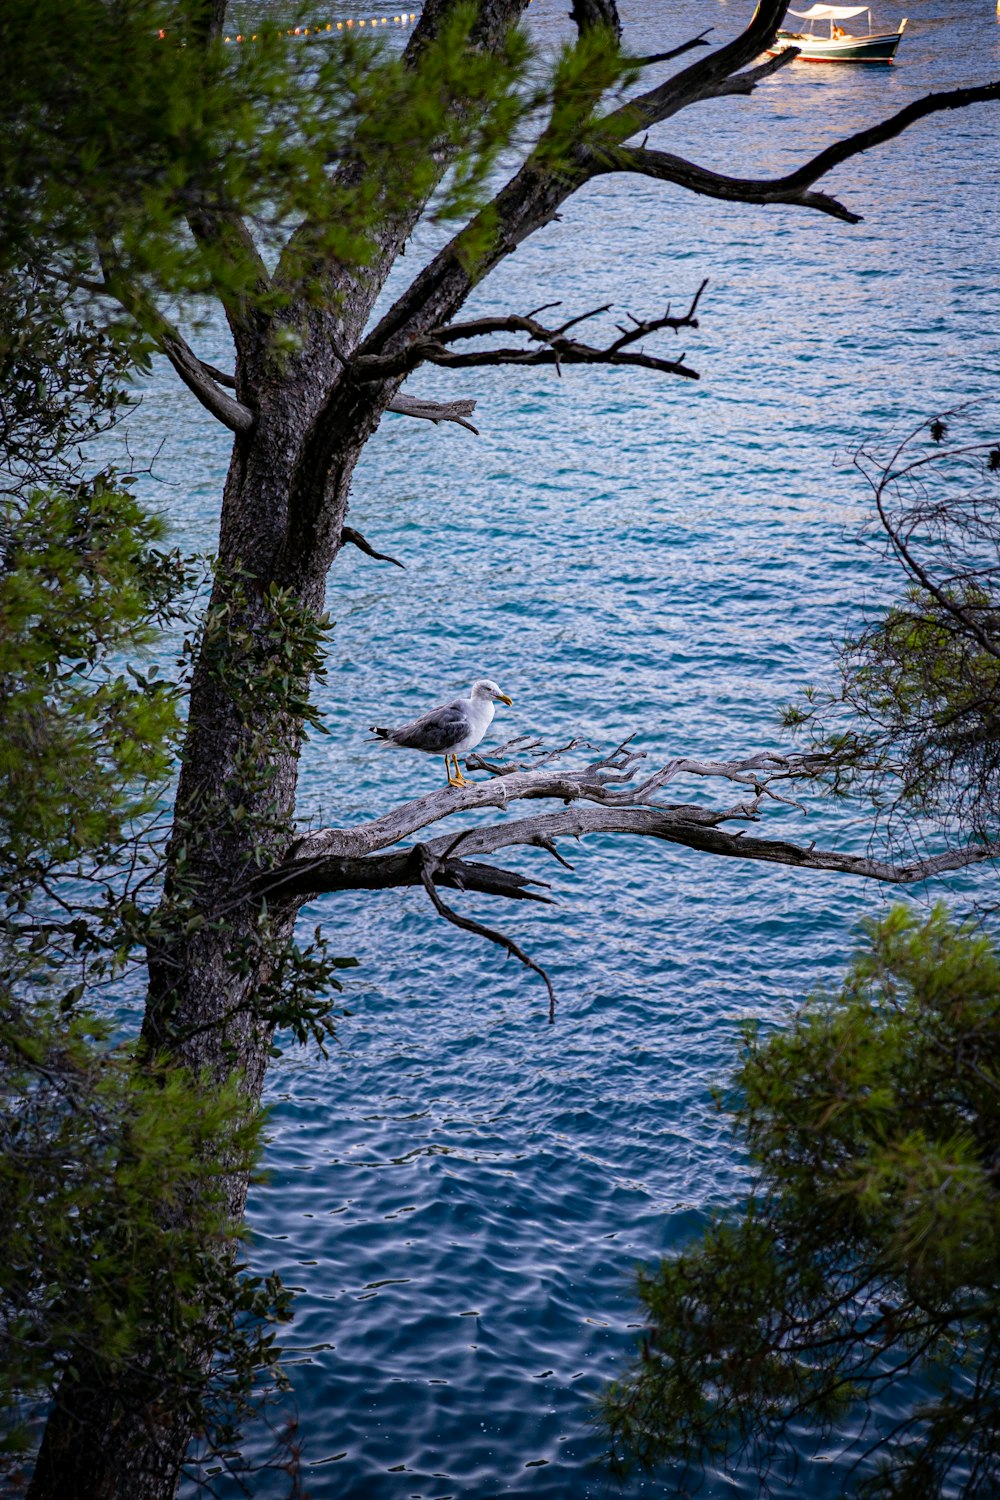 a seagull sitting on a tree branch near the water